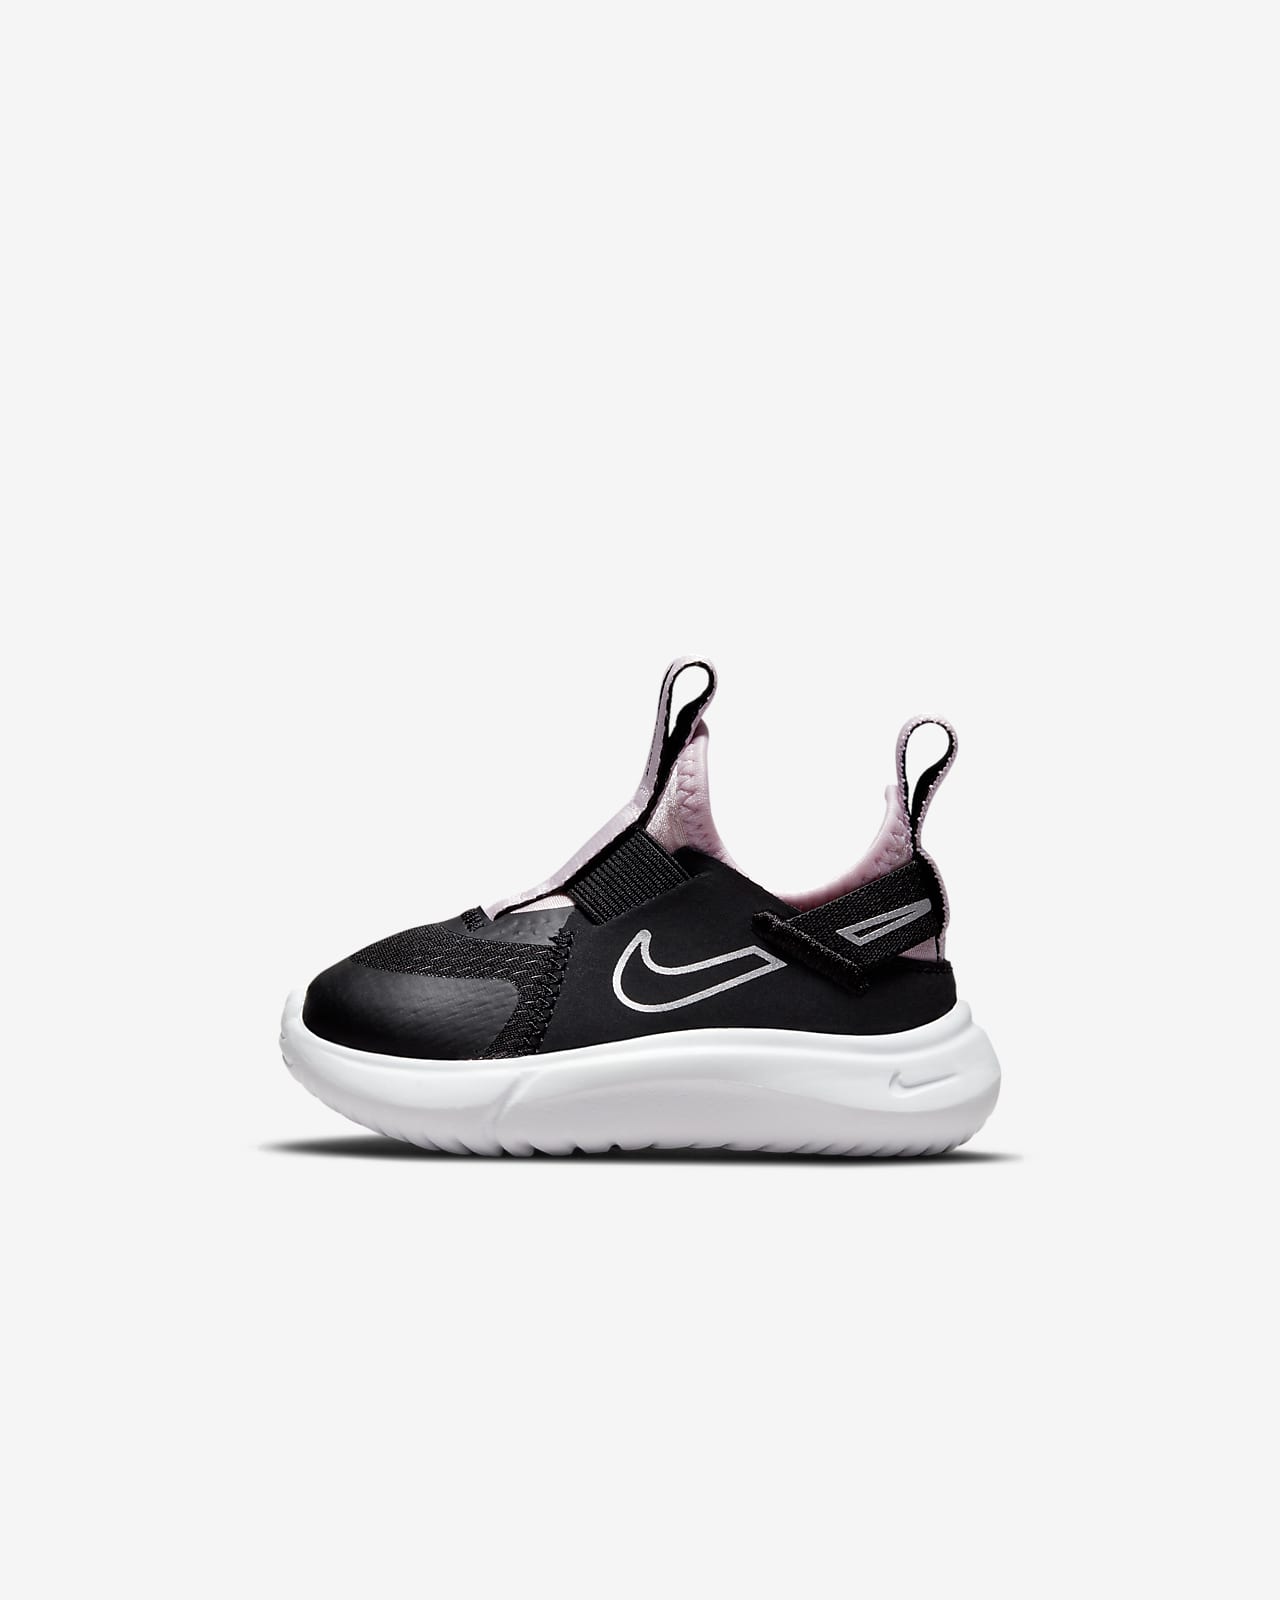 Plus Baby/Toddler Shoes. Nike.com